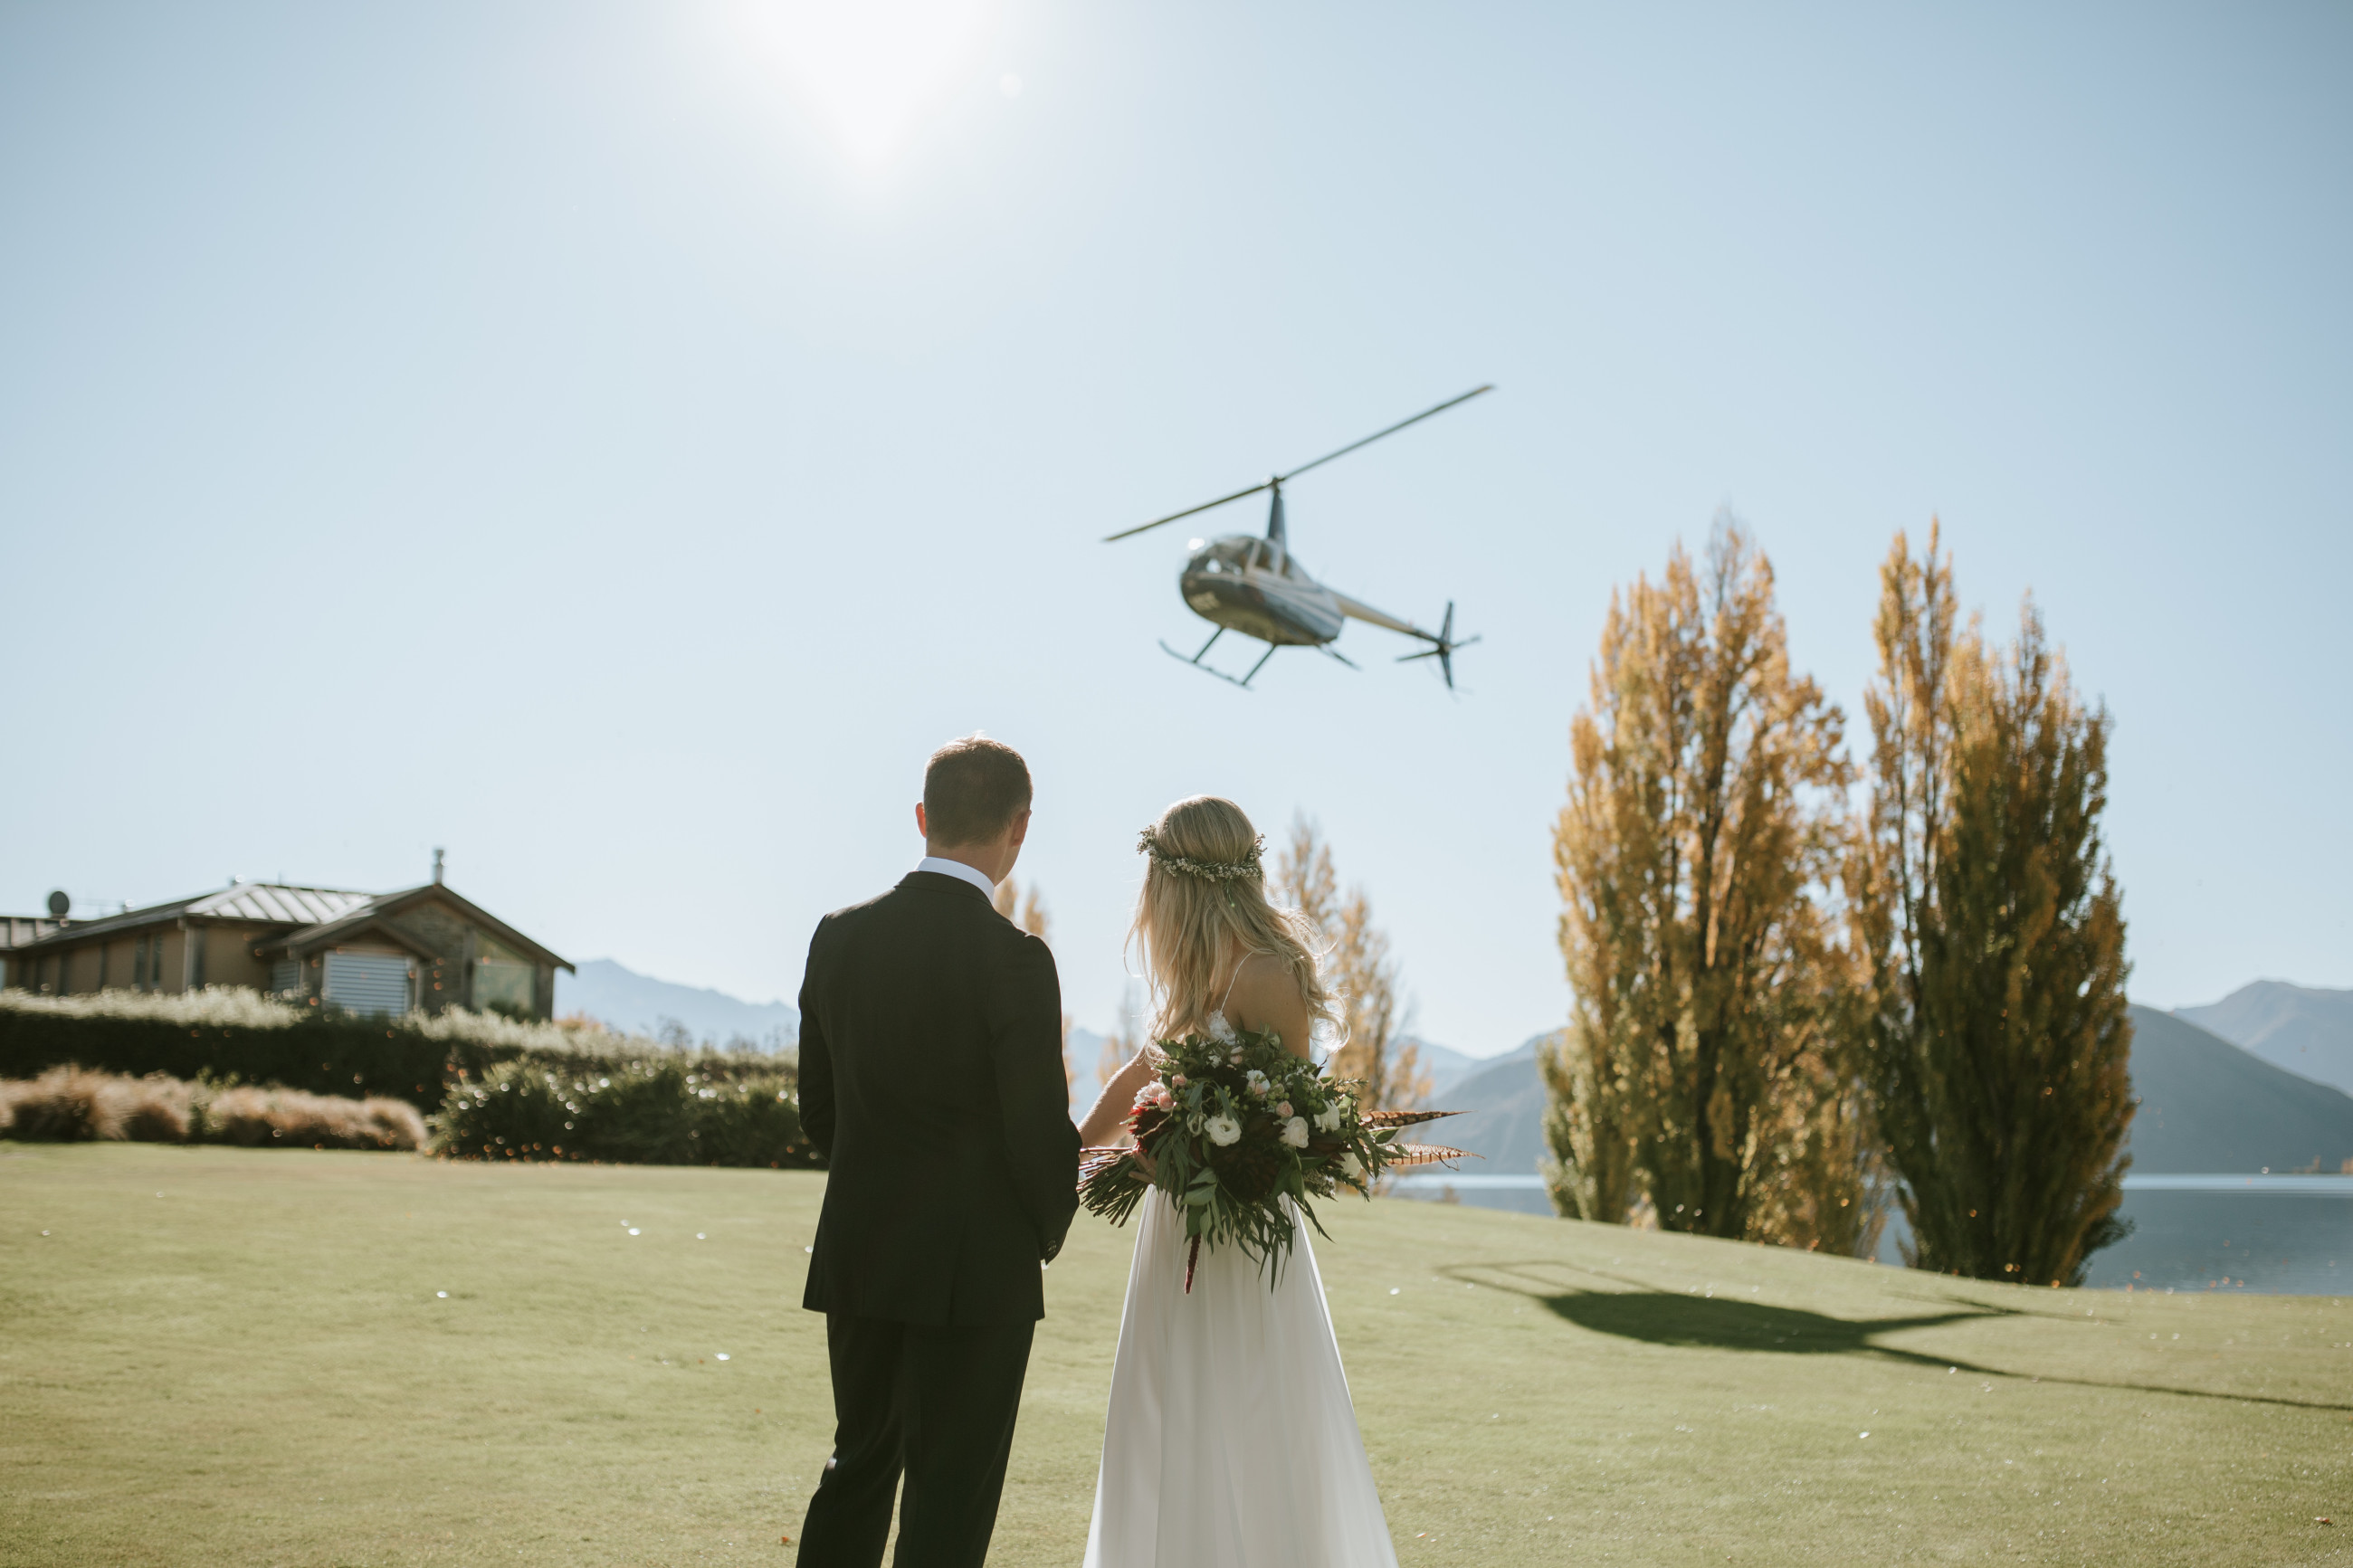 Wanaka helicopter wedding photos can be arranged!